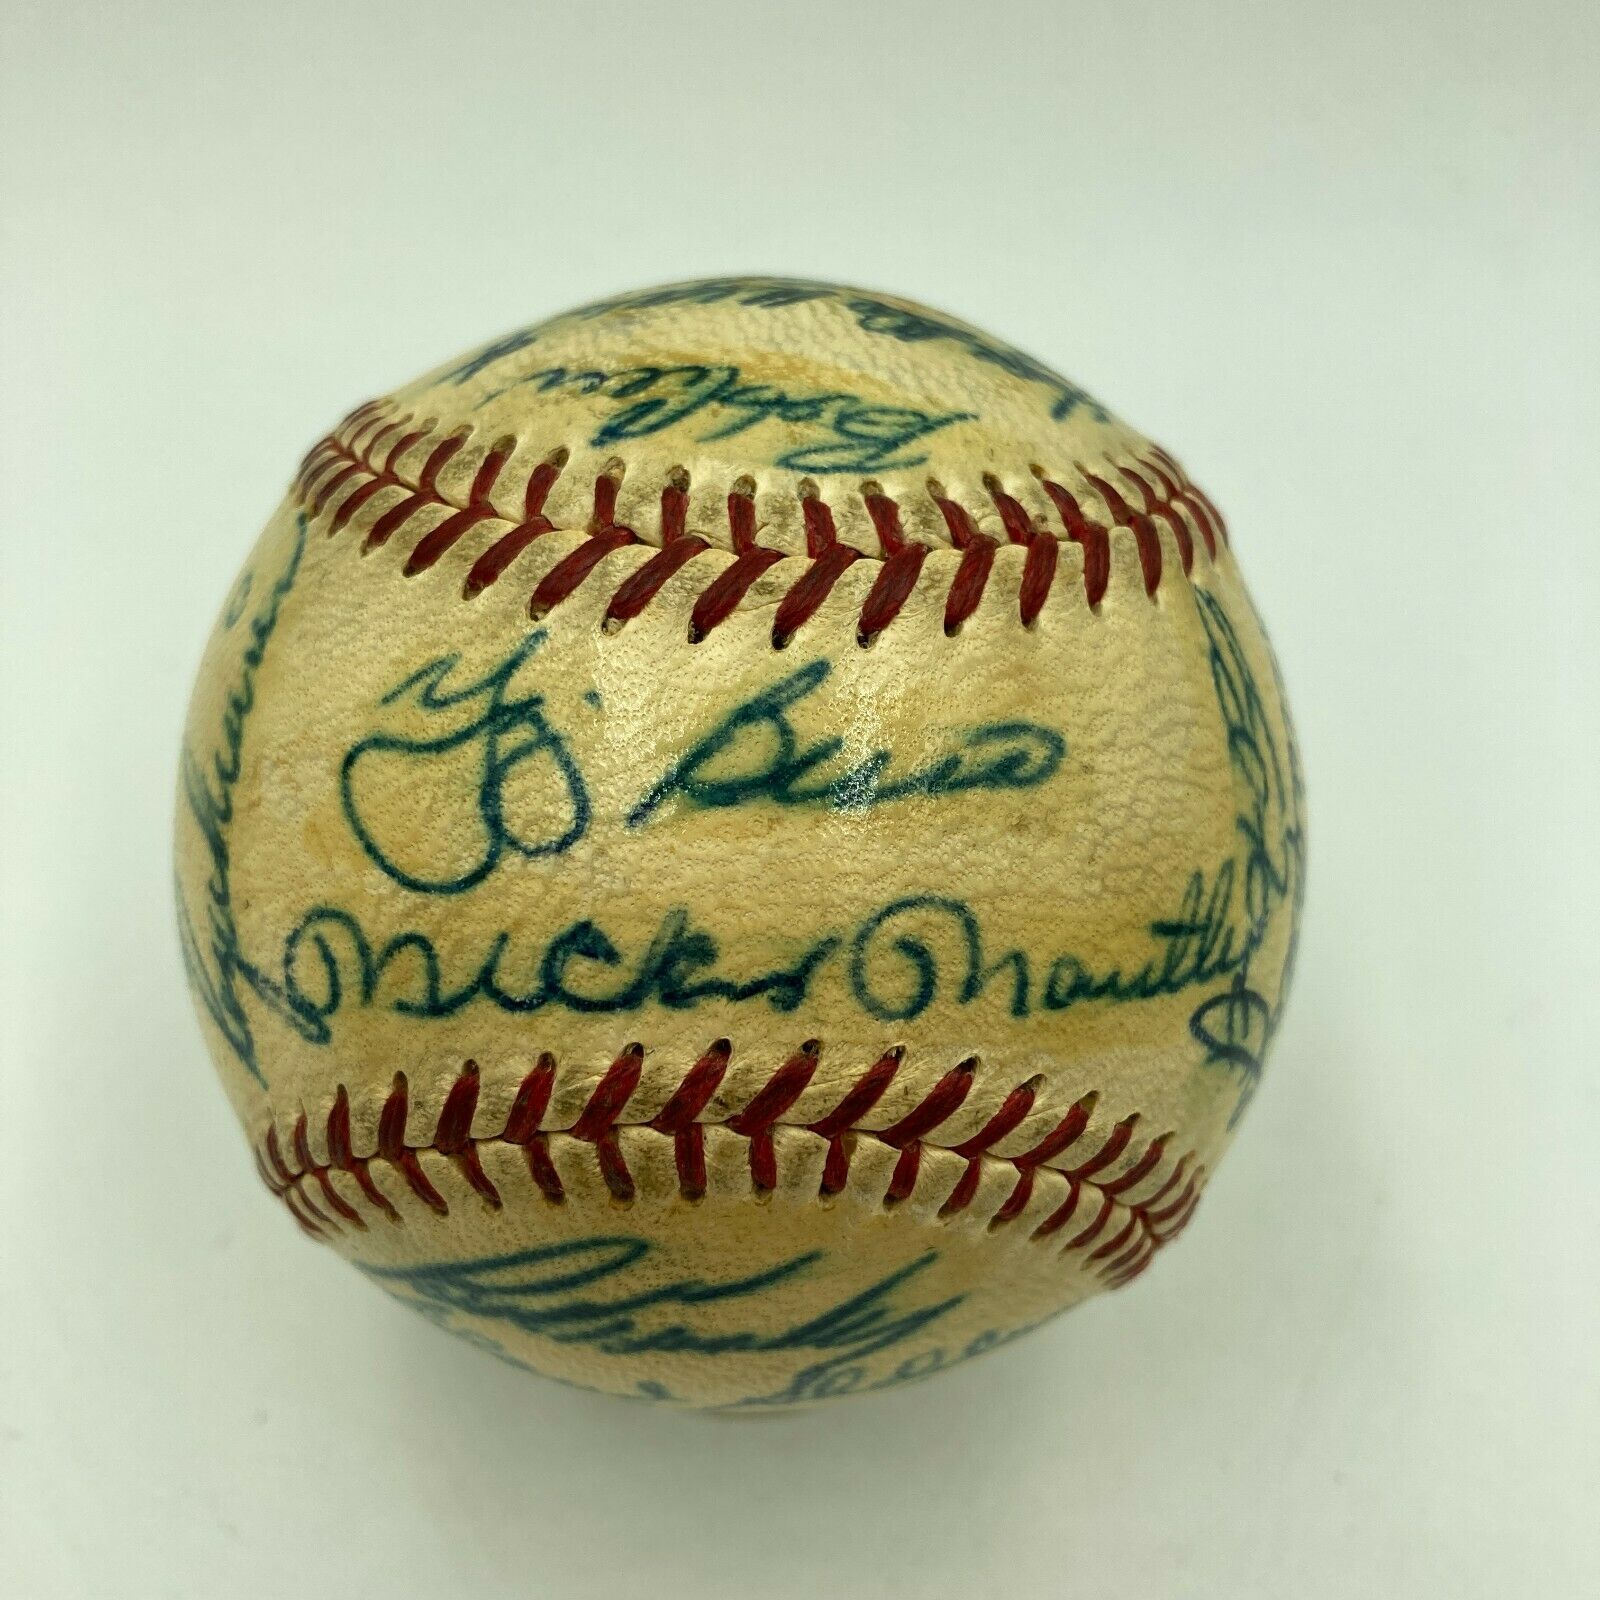 Autographed Baseballs, Babe Ruth, Roger Maris, 1956 and 1961